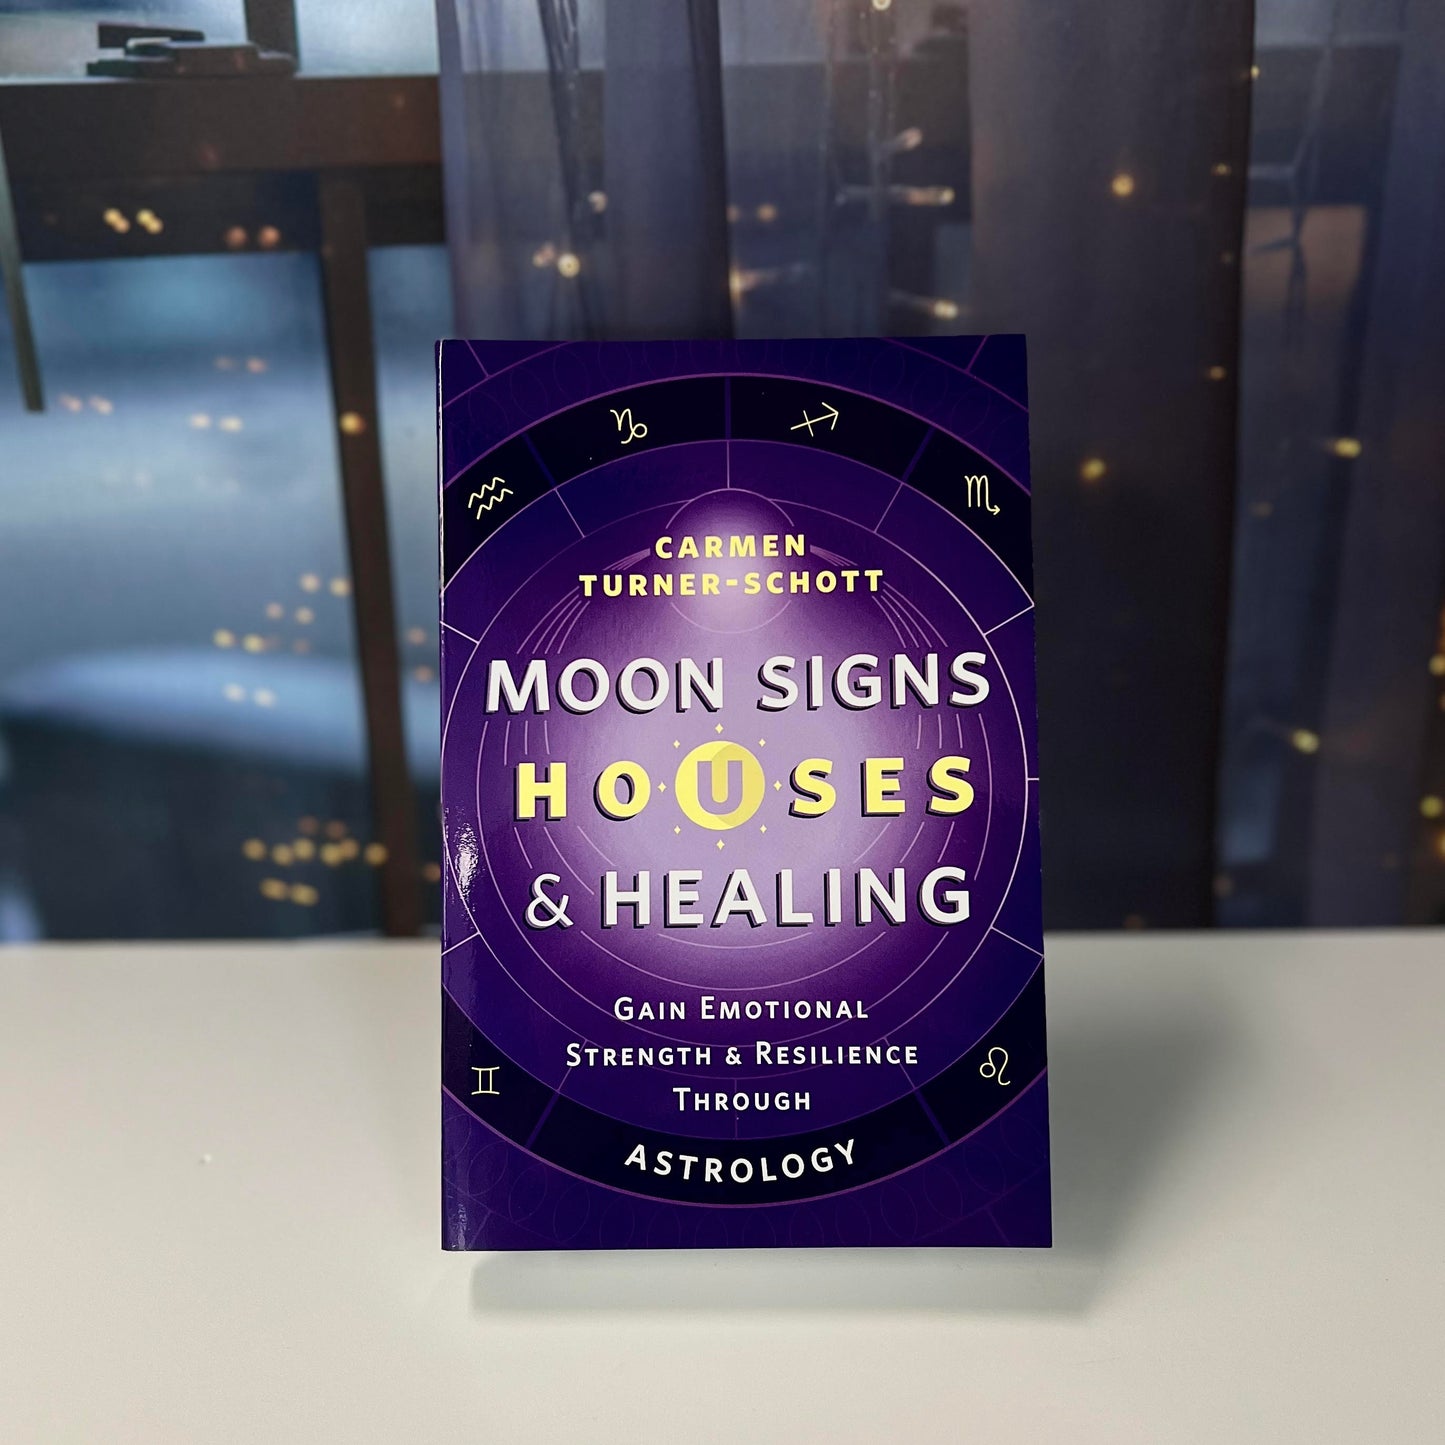 Moon Signs, Houses & Healing: Gain Emotional Strength and Resilience through Astrology by Carmen Turner-Schott